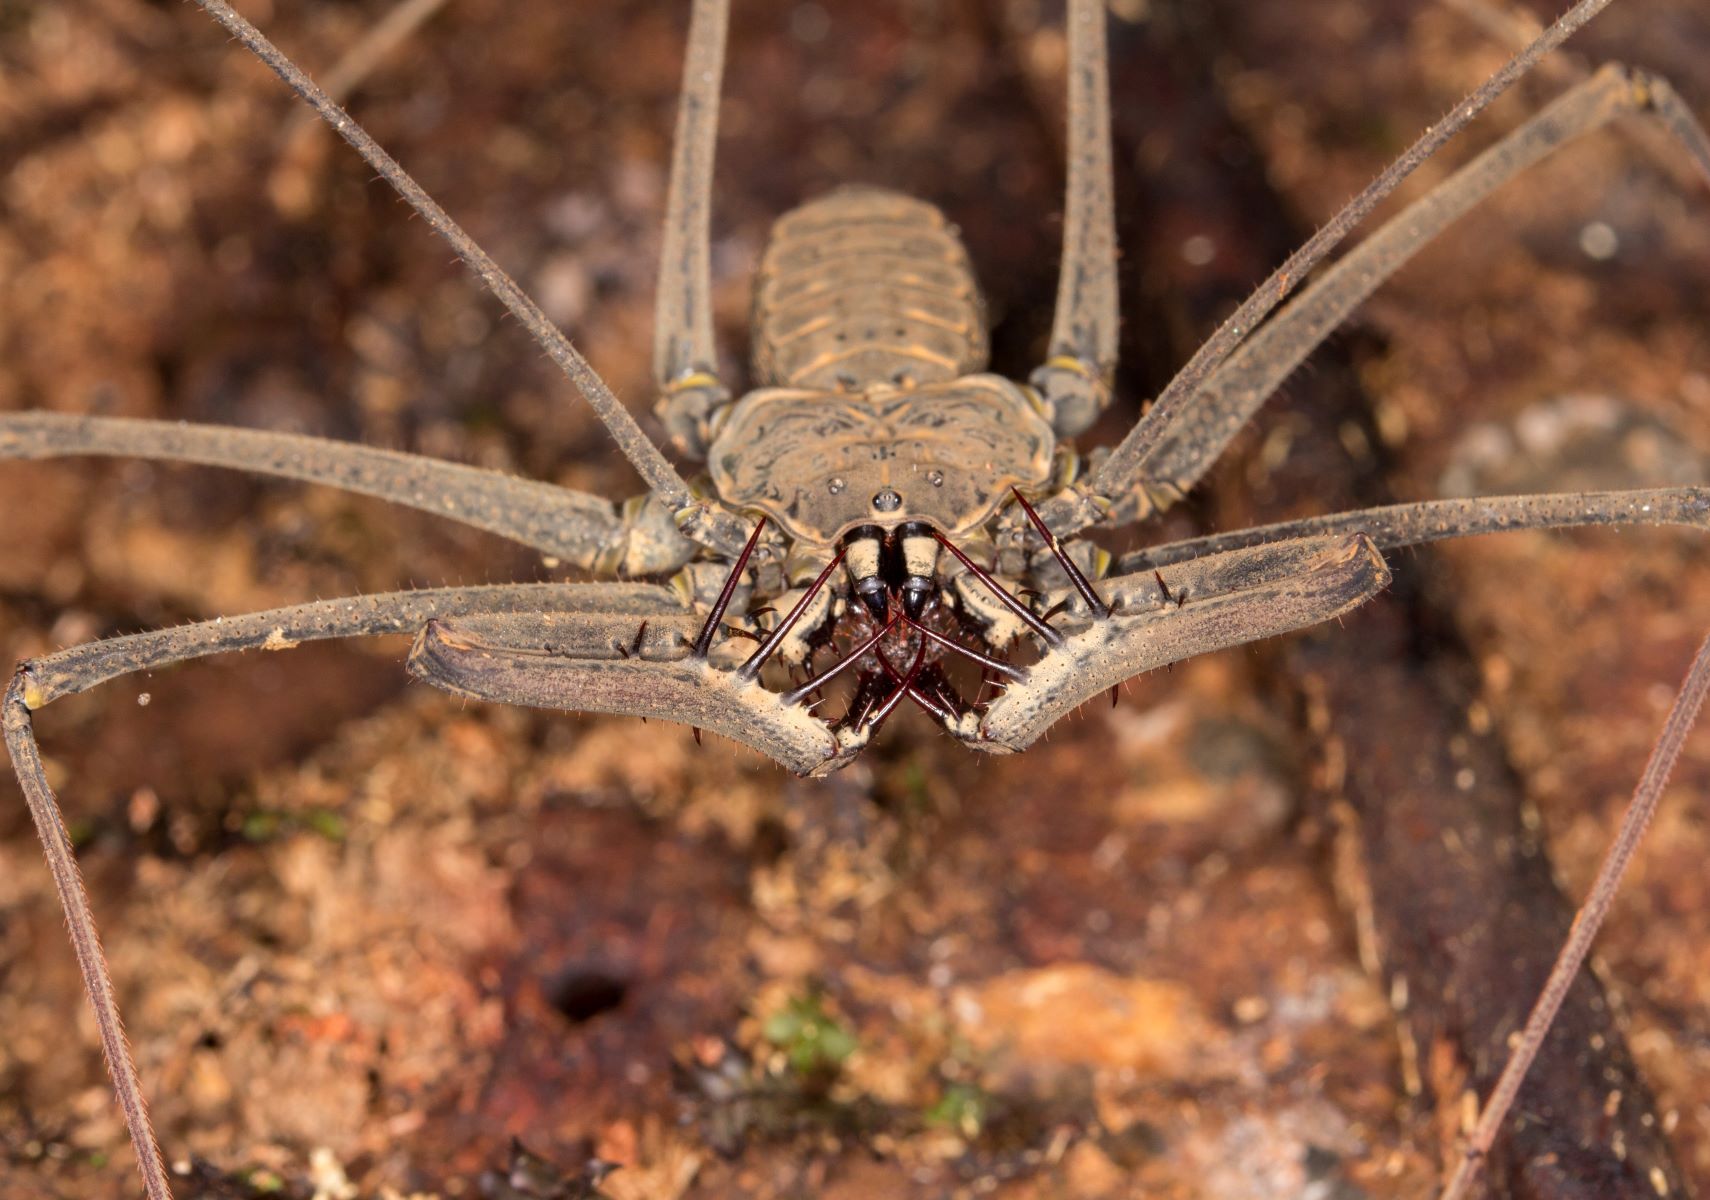 Spiders 101: Types of Spiders & Spider Identification